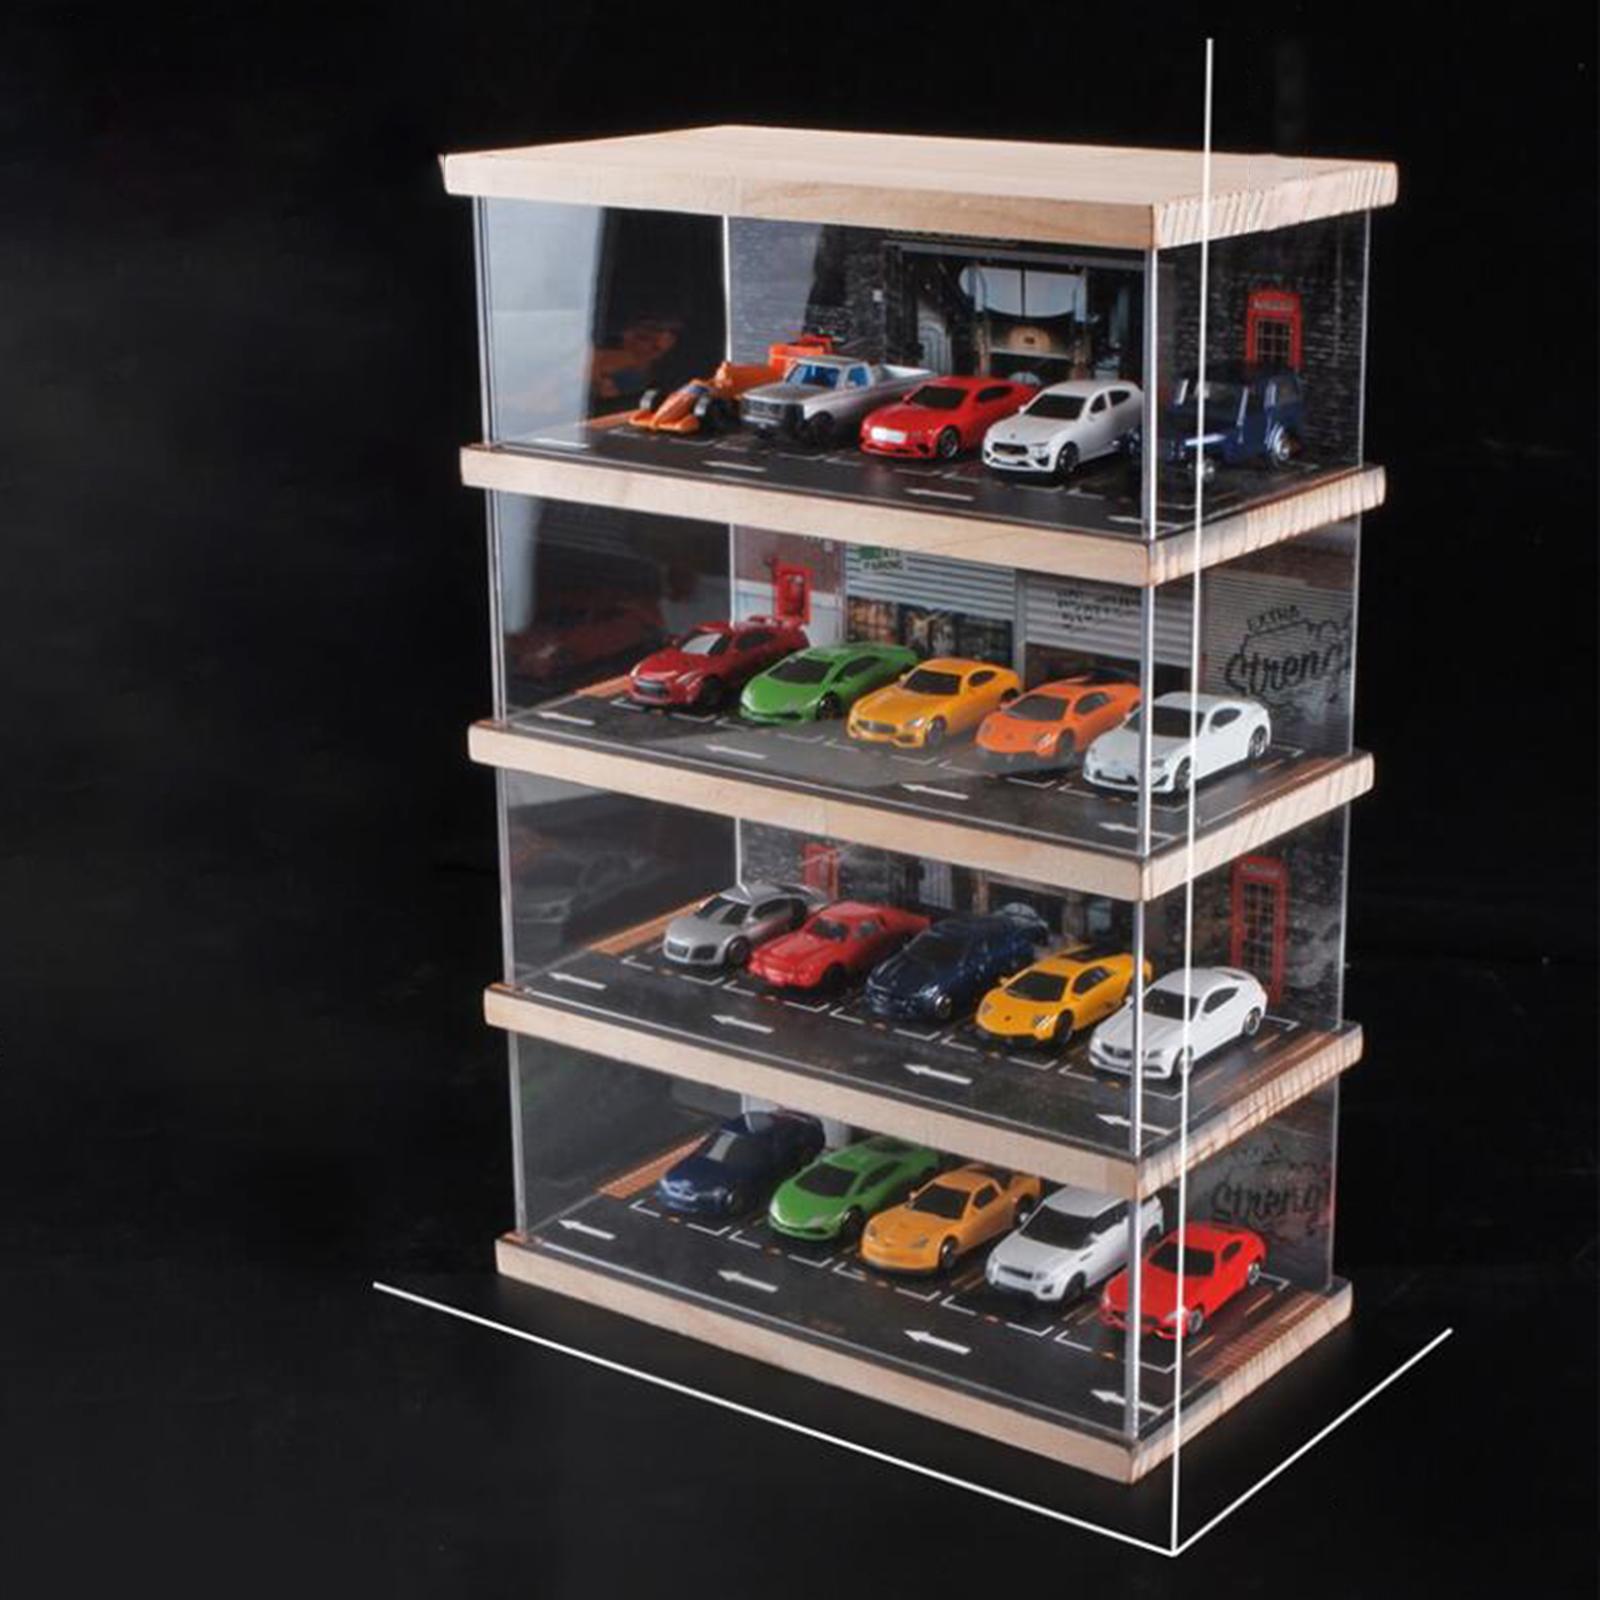 1/64 Scale Toy Car Parking Lot Desktop Decor Variable Protective Car Garage  Display Case, for Collectors, Sports Car Gifts Toy Cars Alloy Car 3 tier